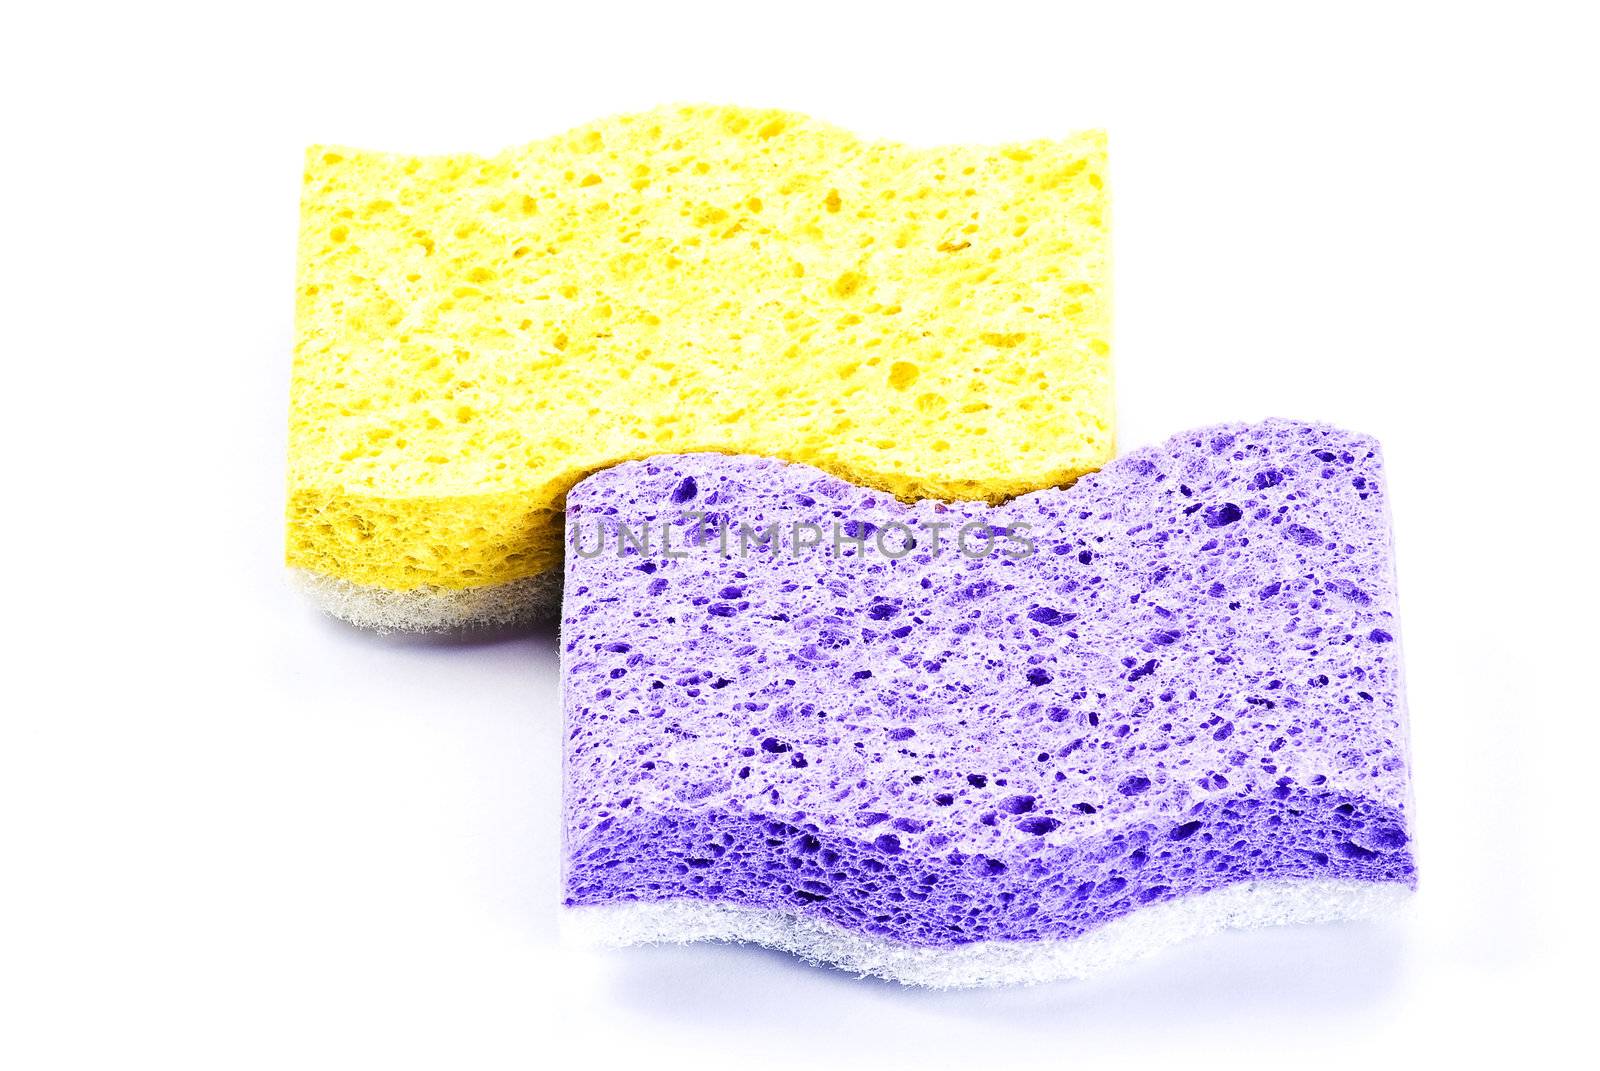 Home care and cleaning sponges over white background